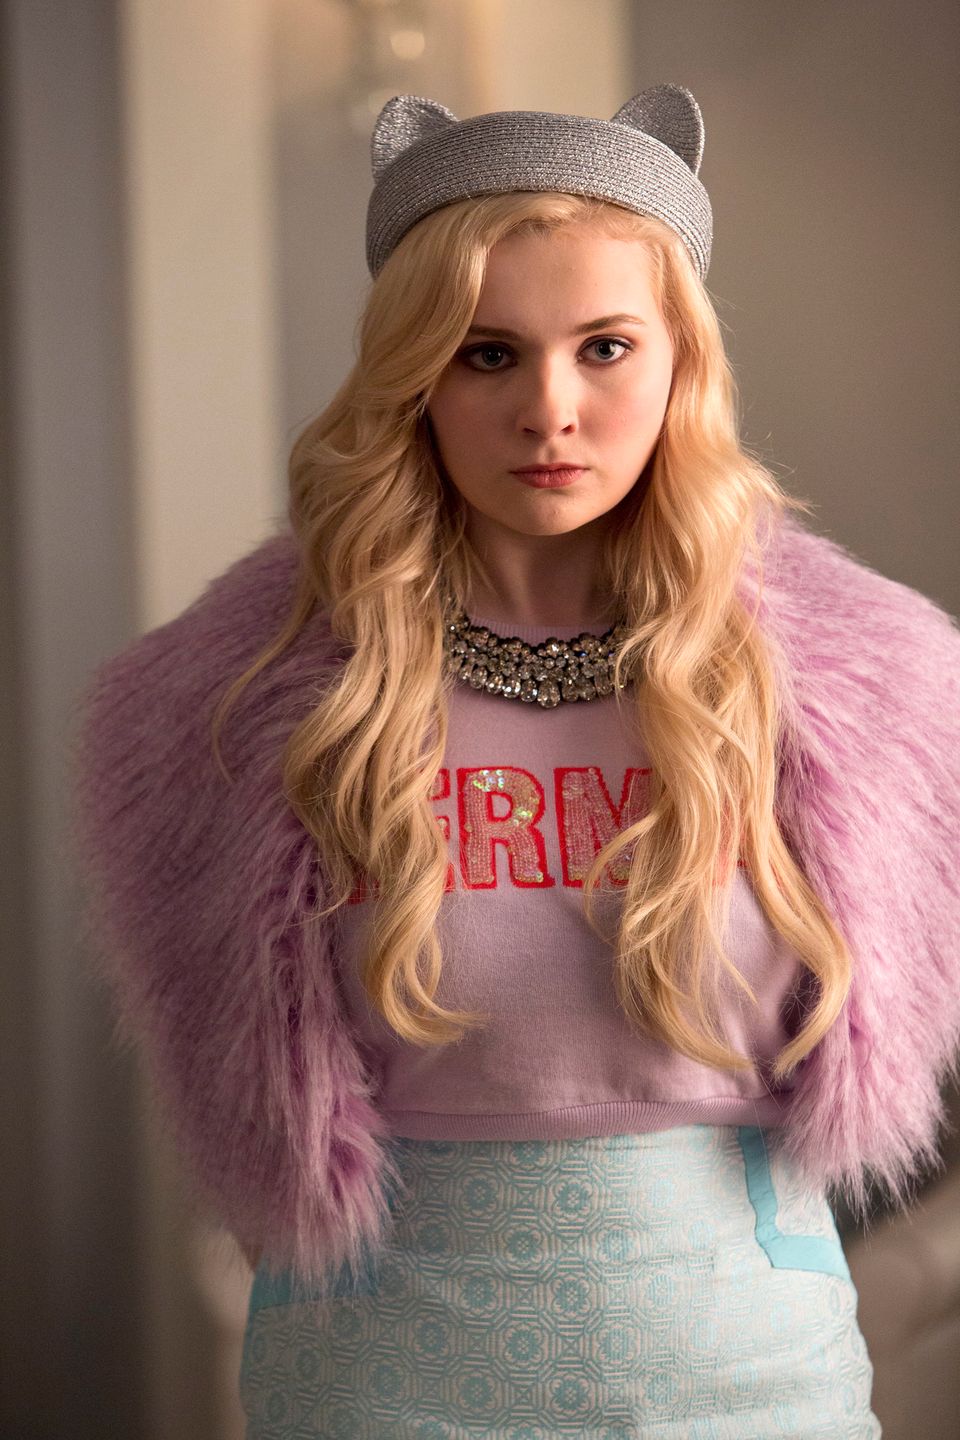 Scream Queens' Costume Ideas For The Perfect Chanel-O-Ween | HuffPost  Entertainment